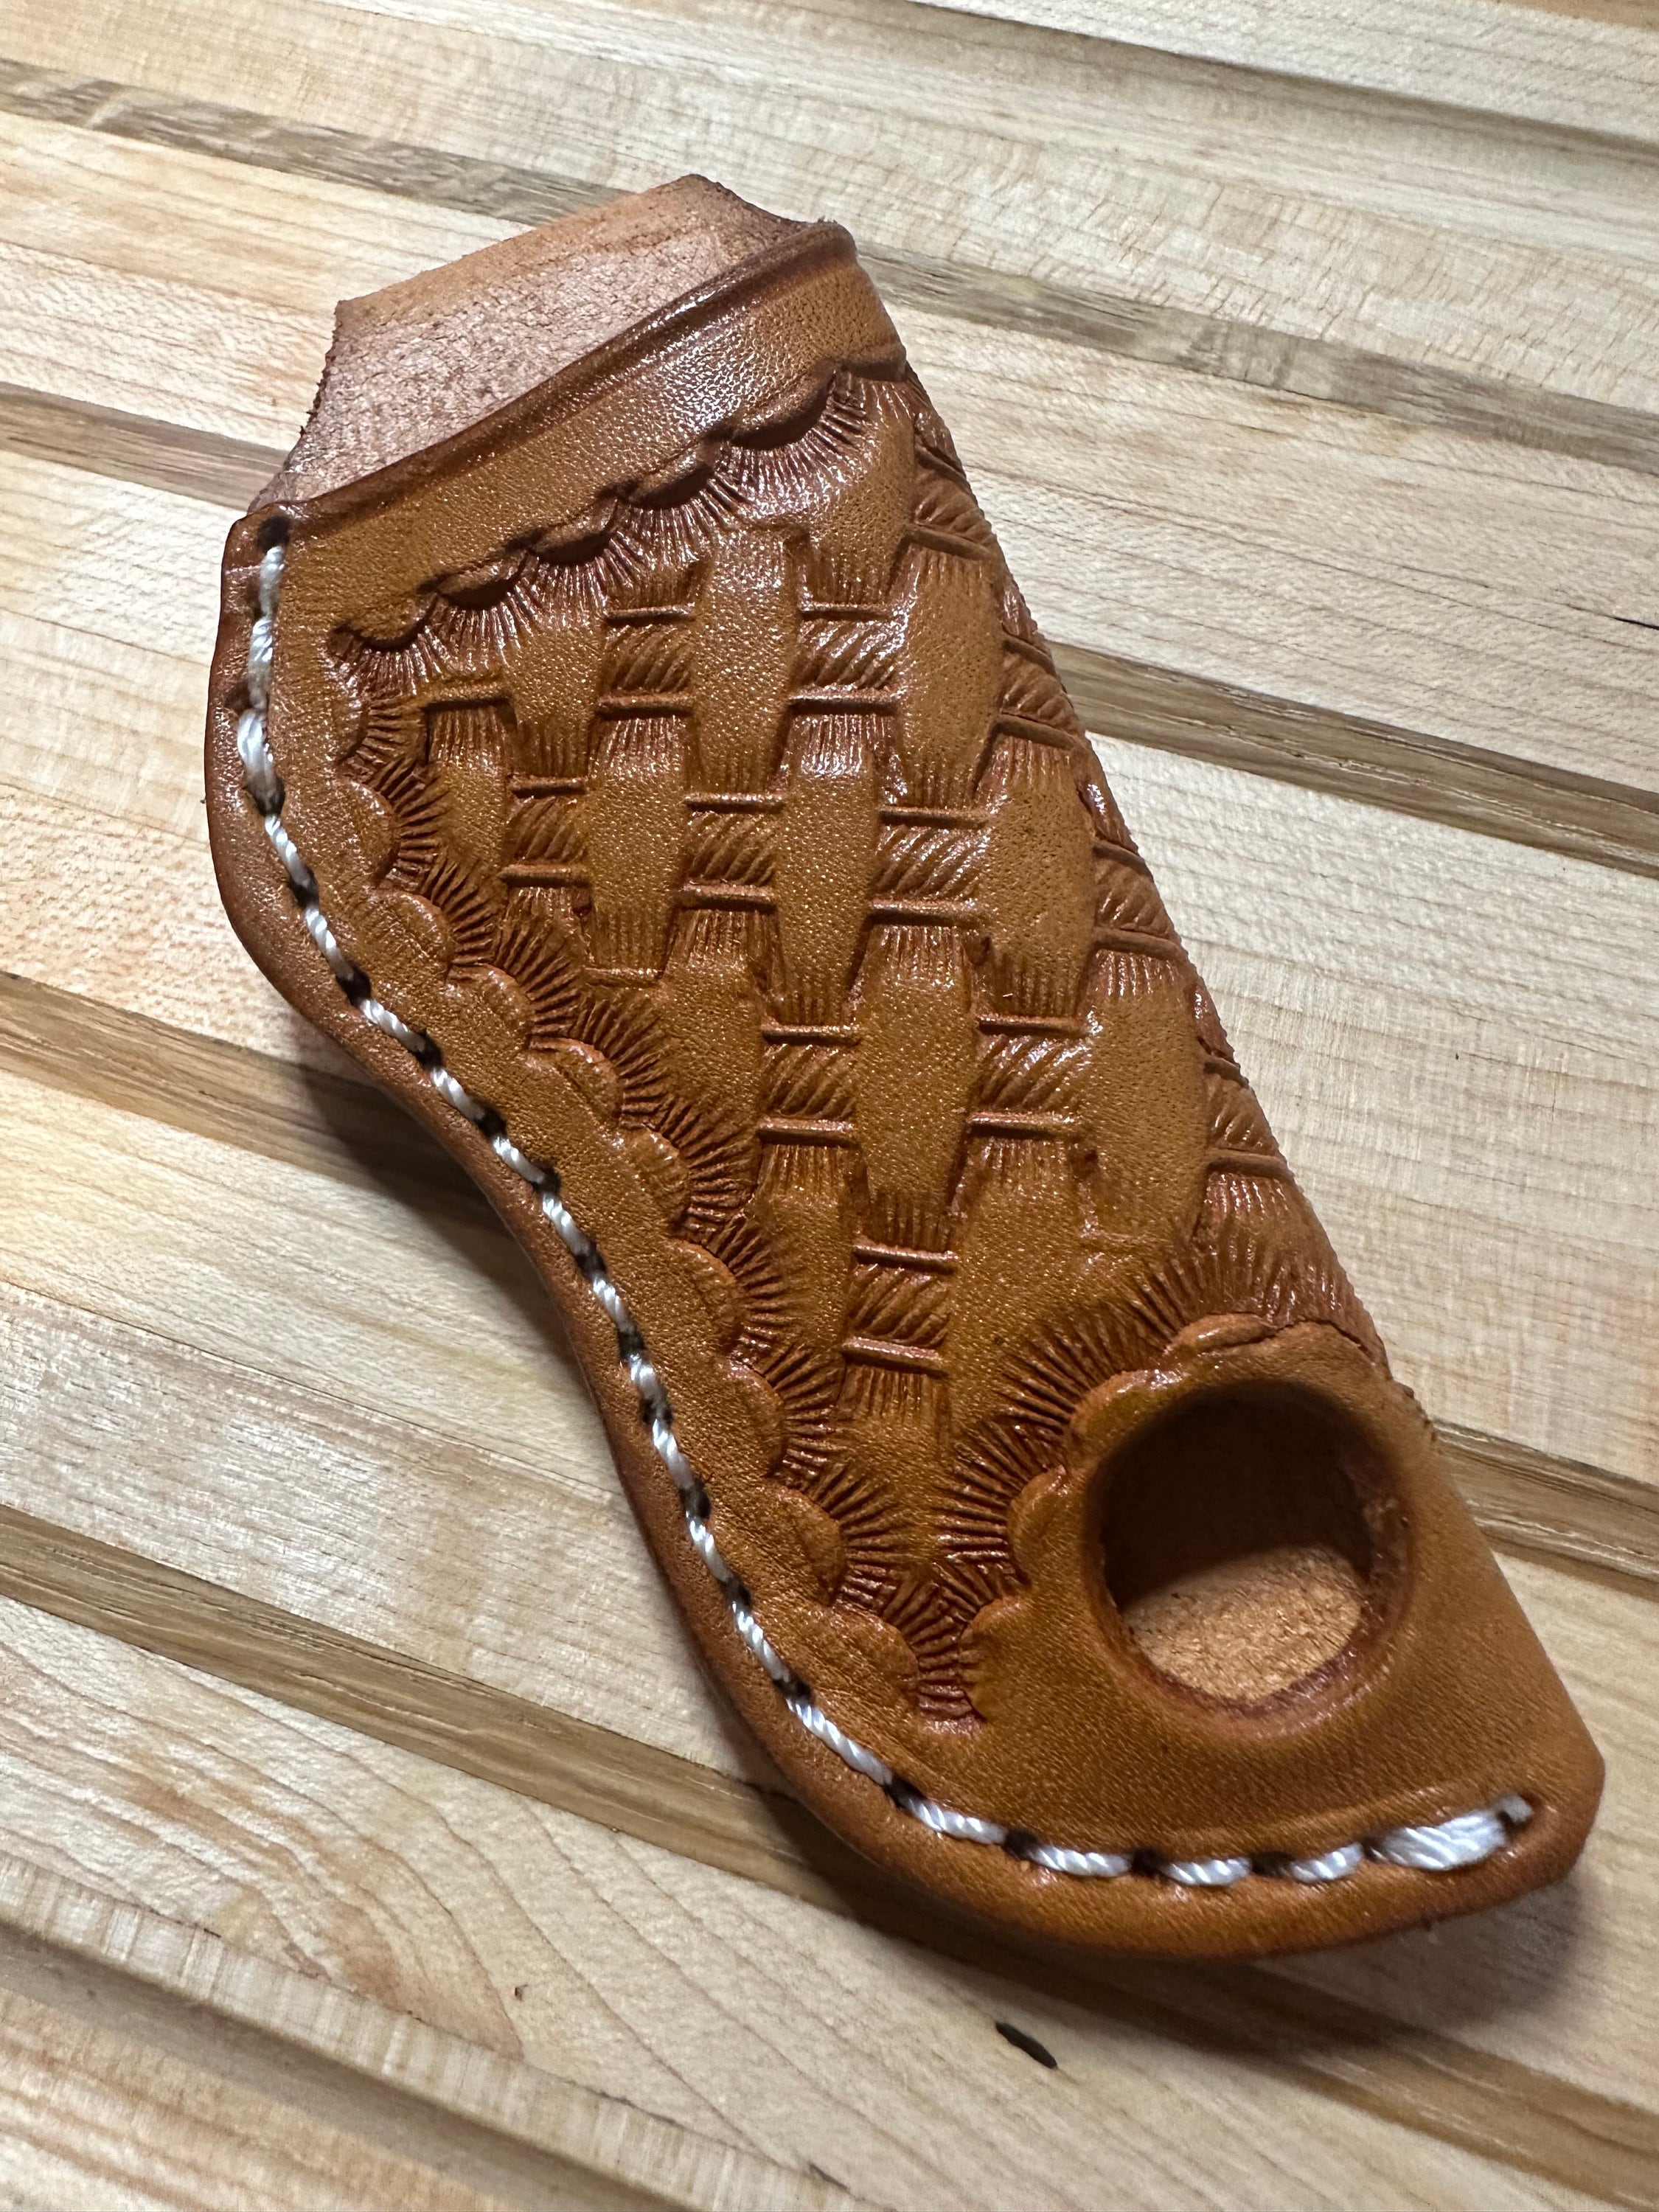 Billhook Sheath / Holster Fold-over Opening Hand Made in the UK Using  British Leather 